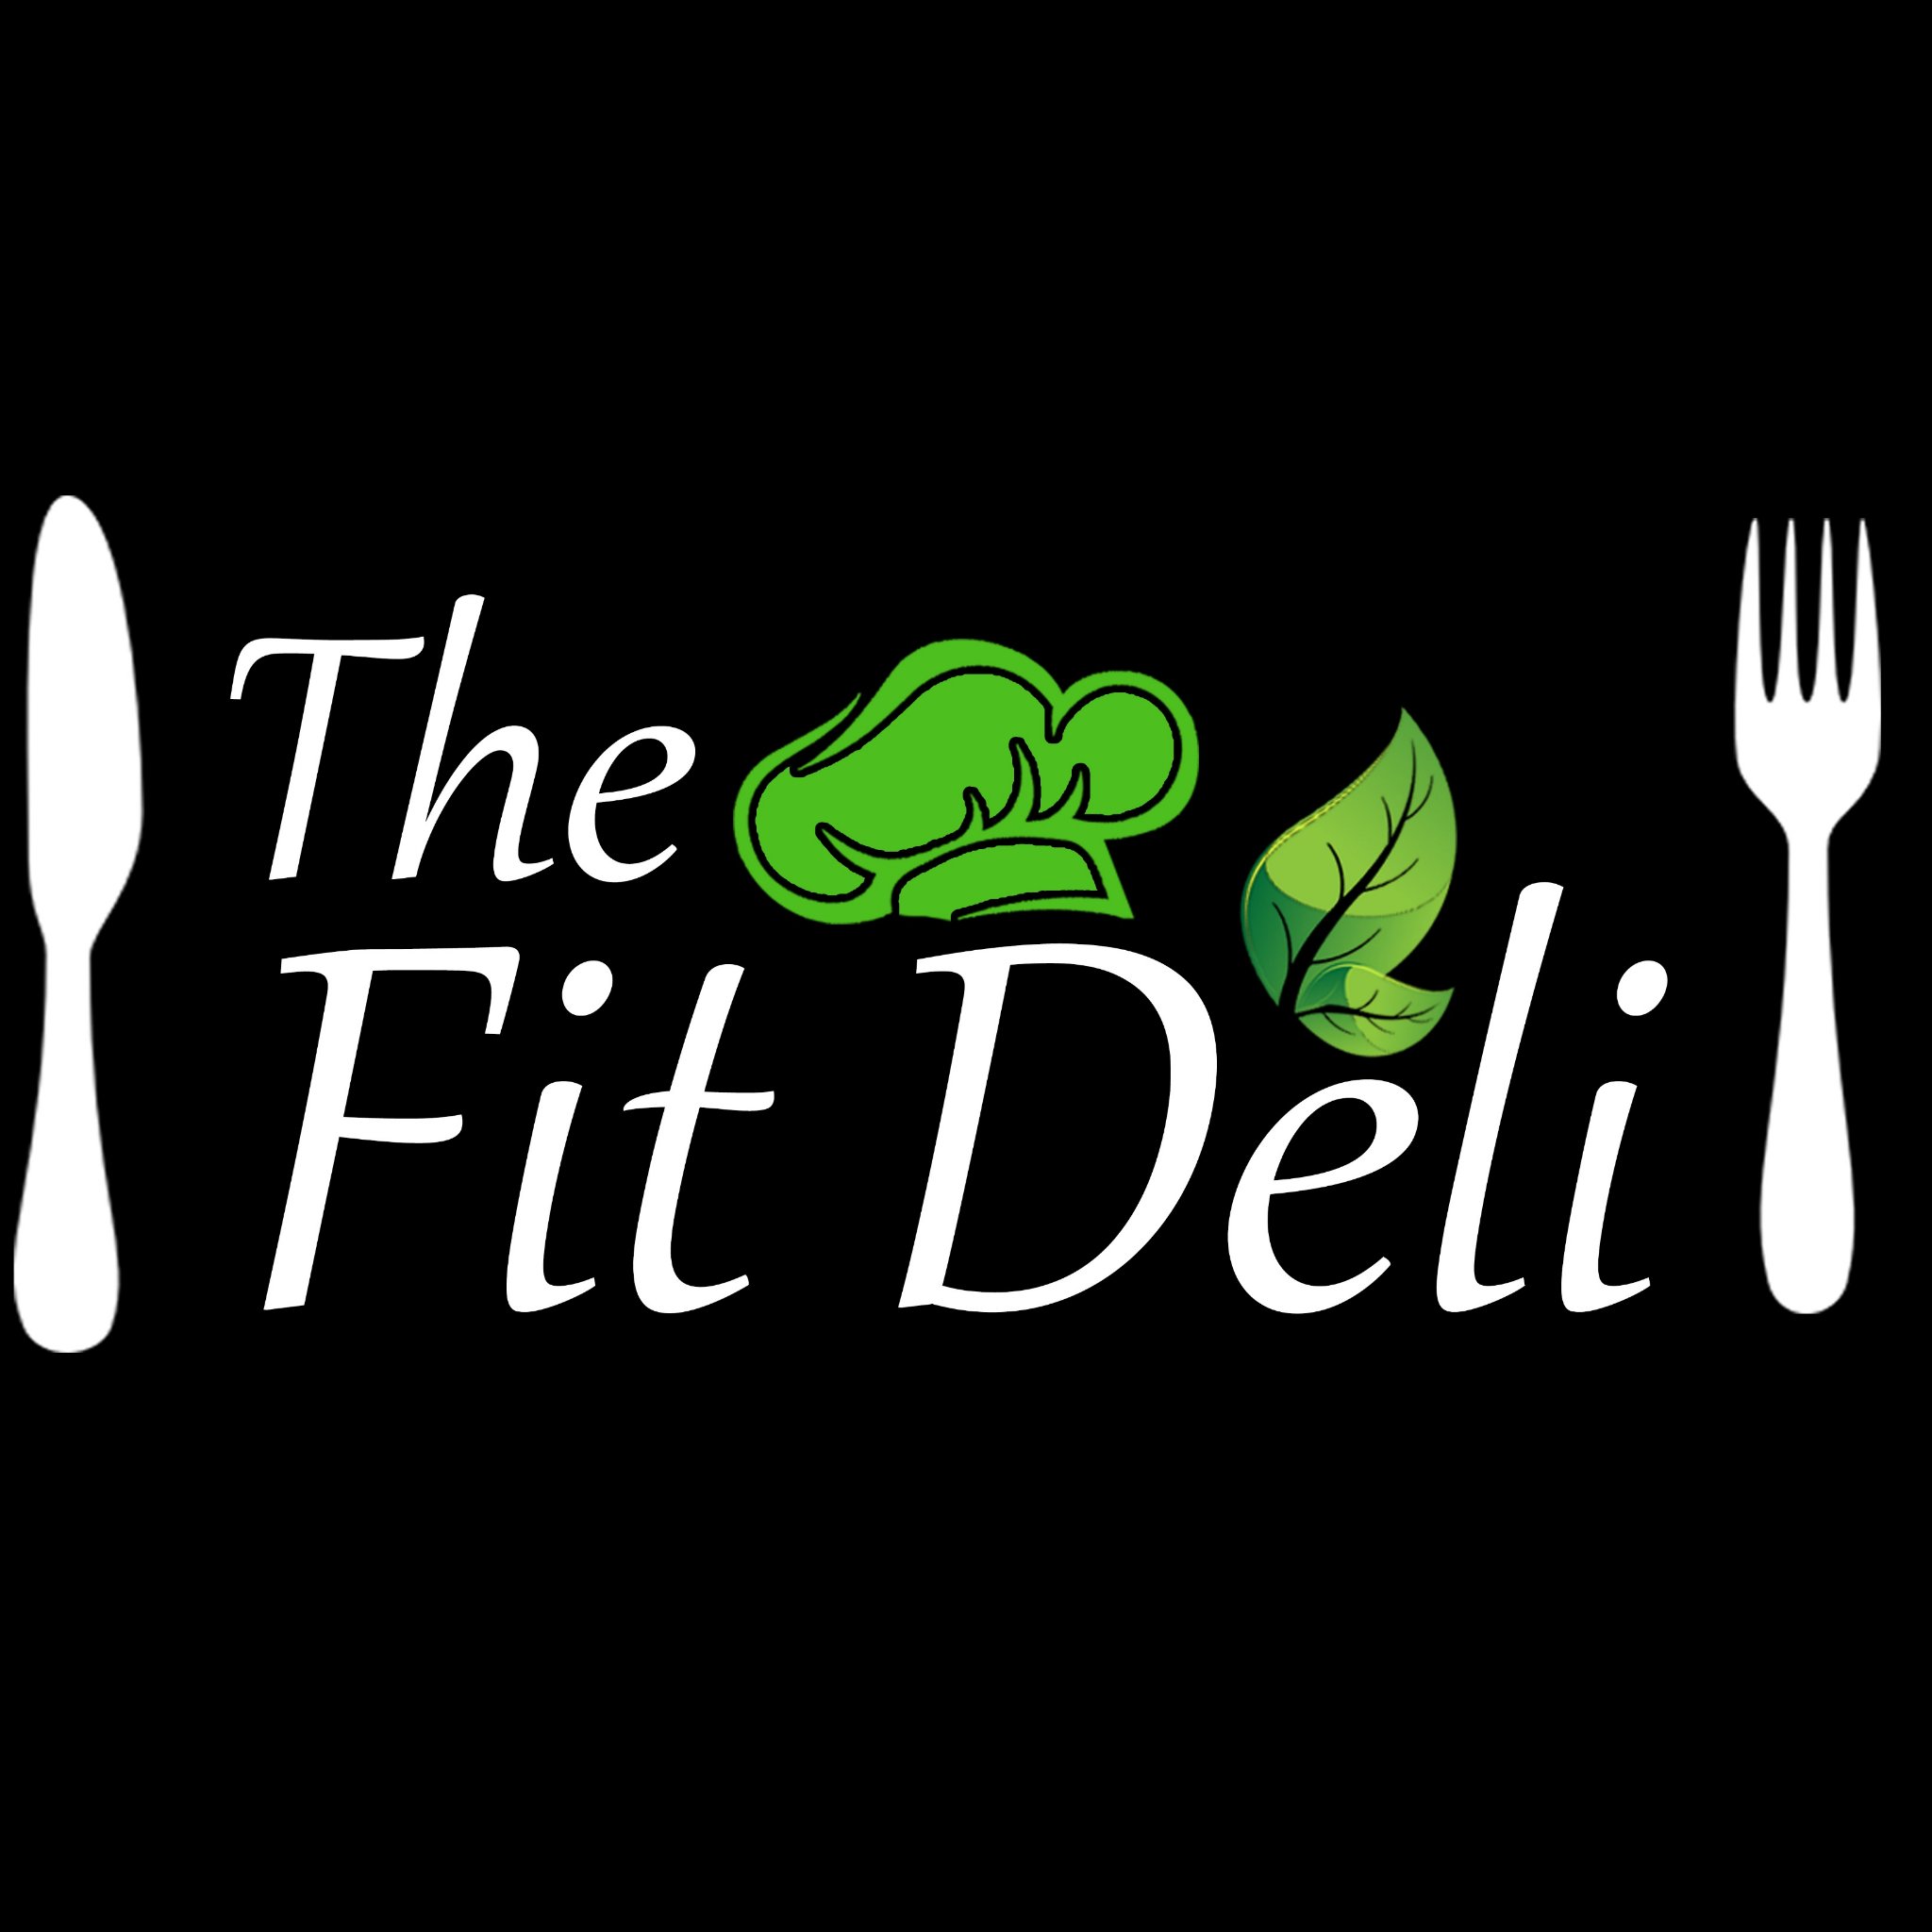 Delicious, Calorie Controlled Food Delivery Service. •Goal Oriented Meal Package •Custom Meal Plans •Nutrition Consultation 
#thefitdeli